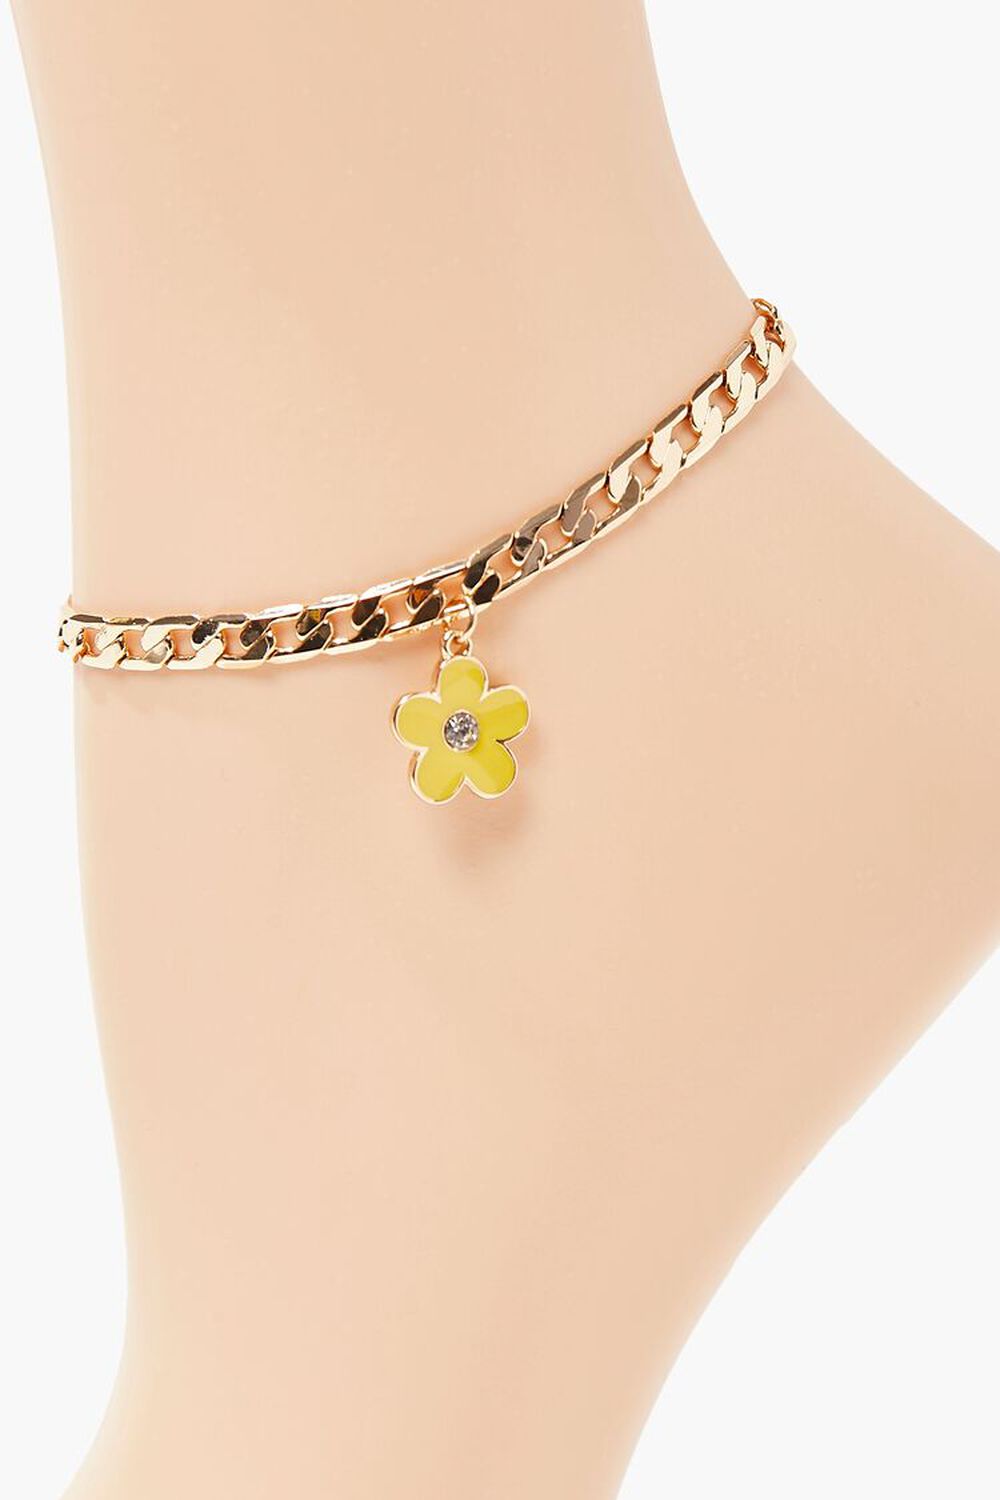 GOLD/YELLOW Flower Charm Chain Anklet, image 2